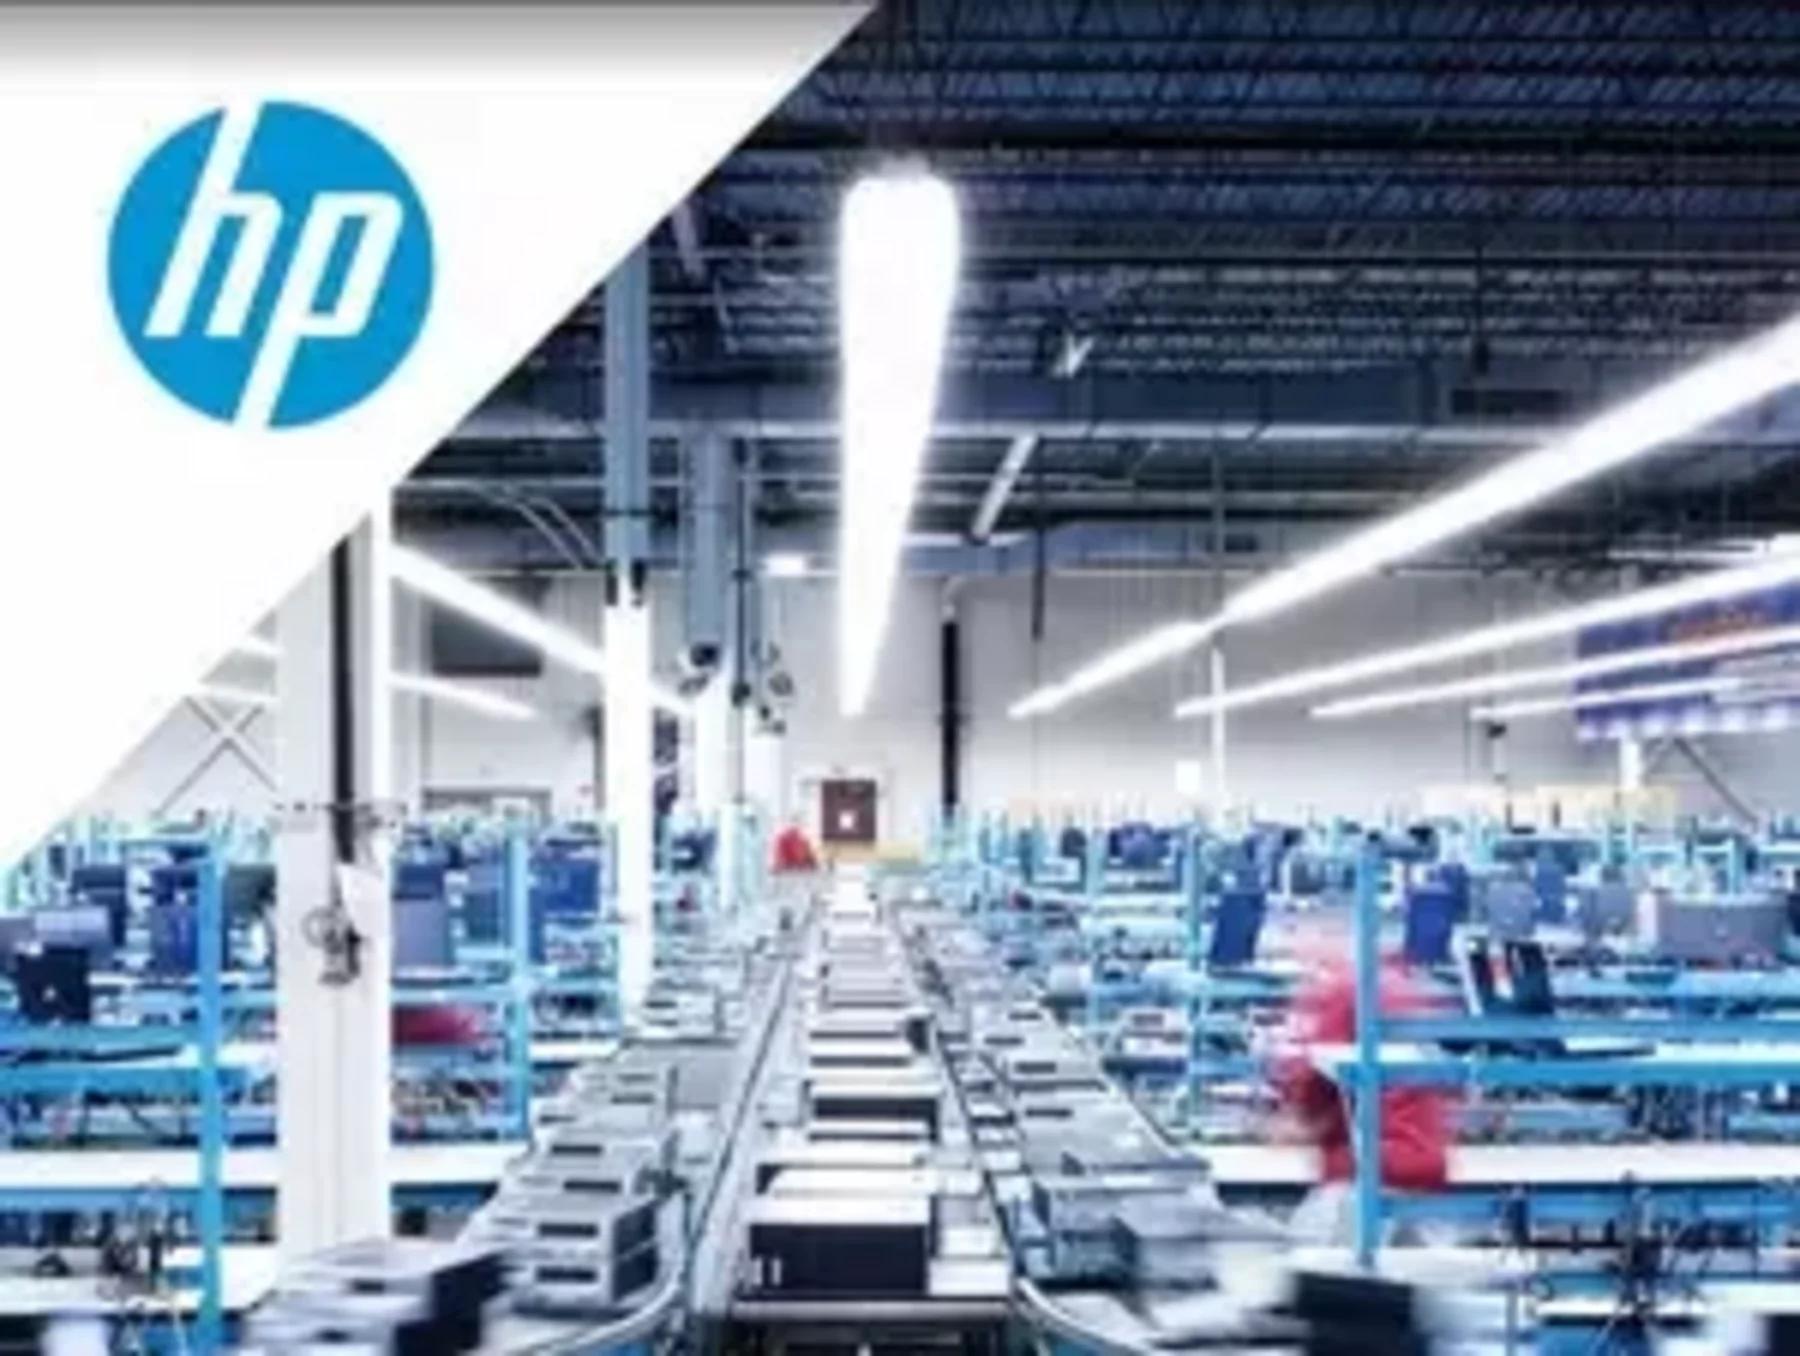 is hewlett packard a manufacturing company - Is HP a manufacturing company